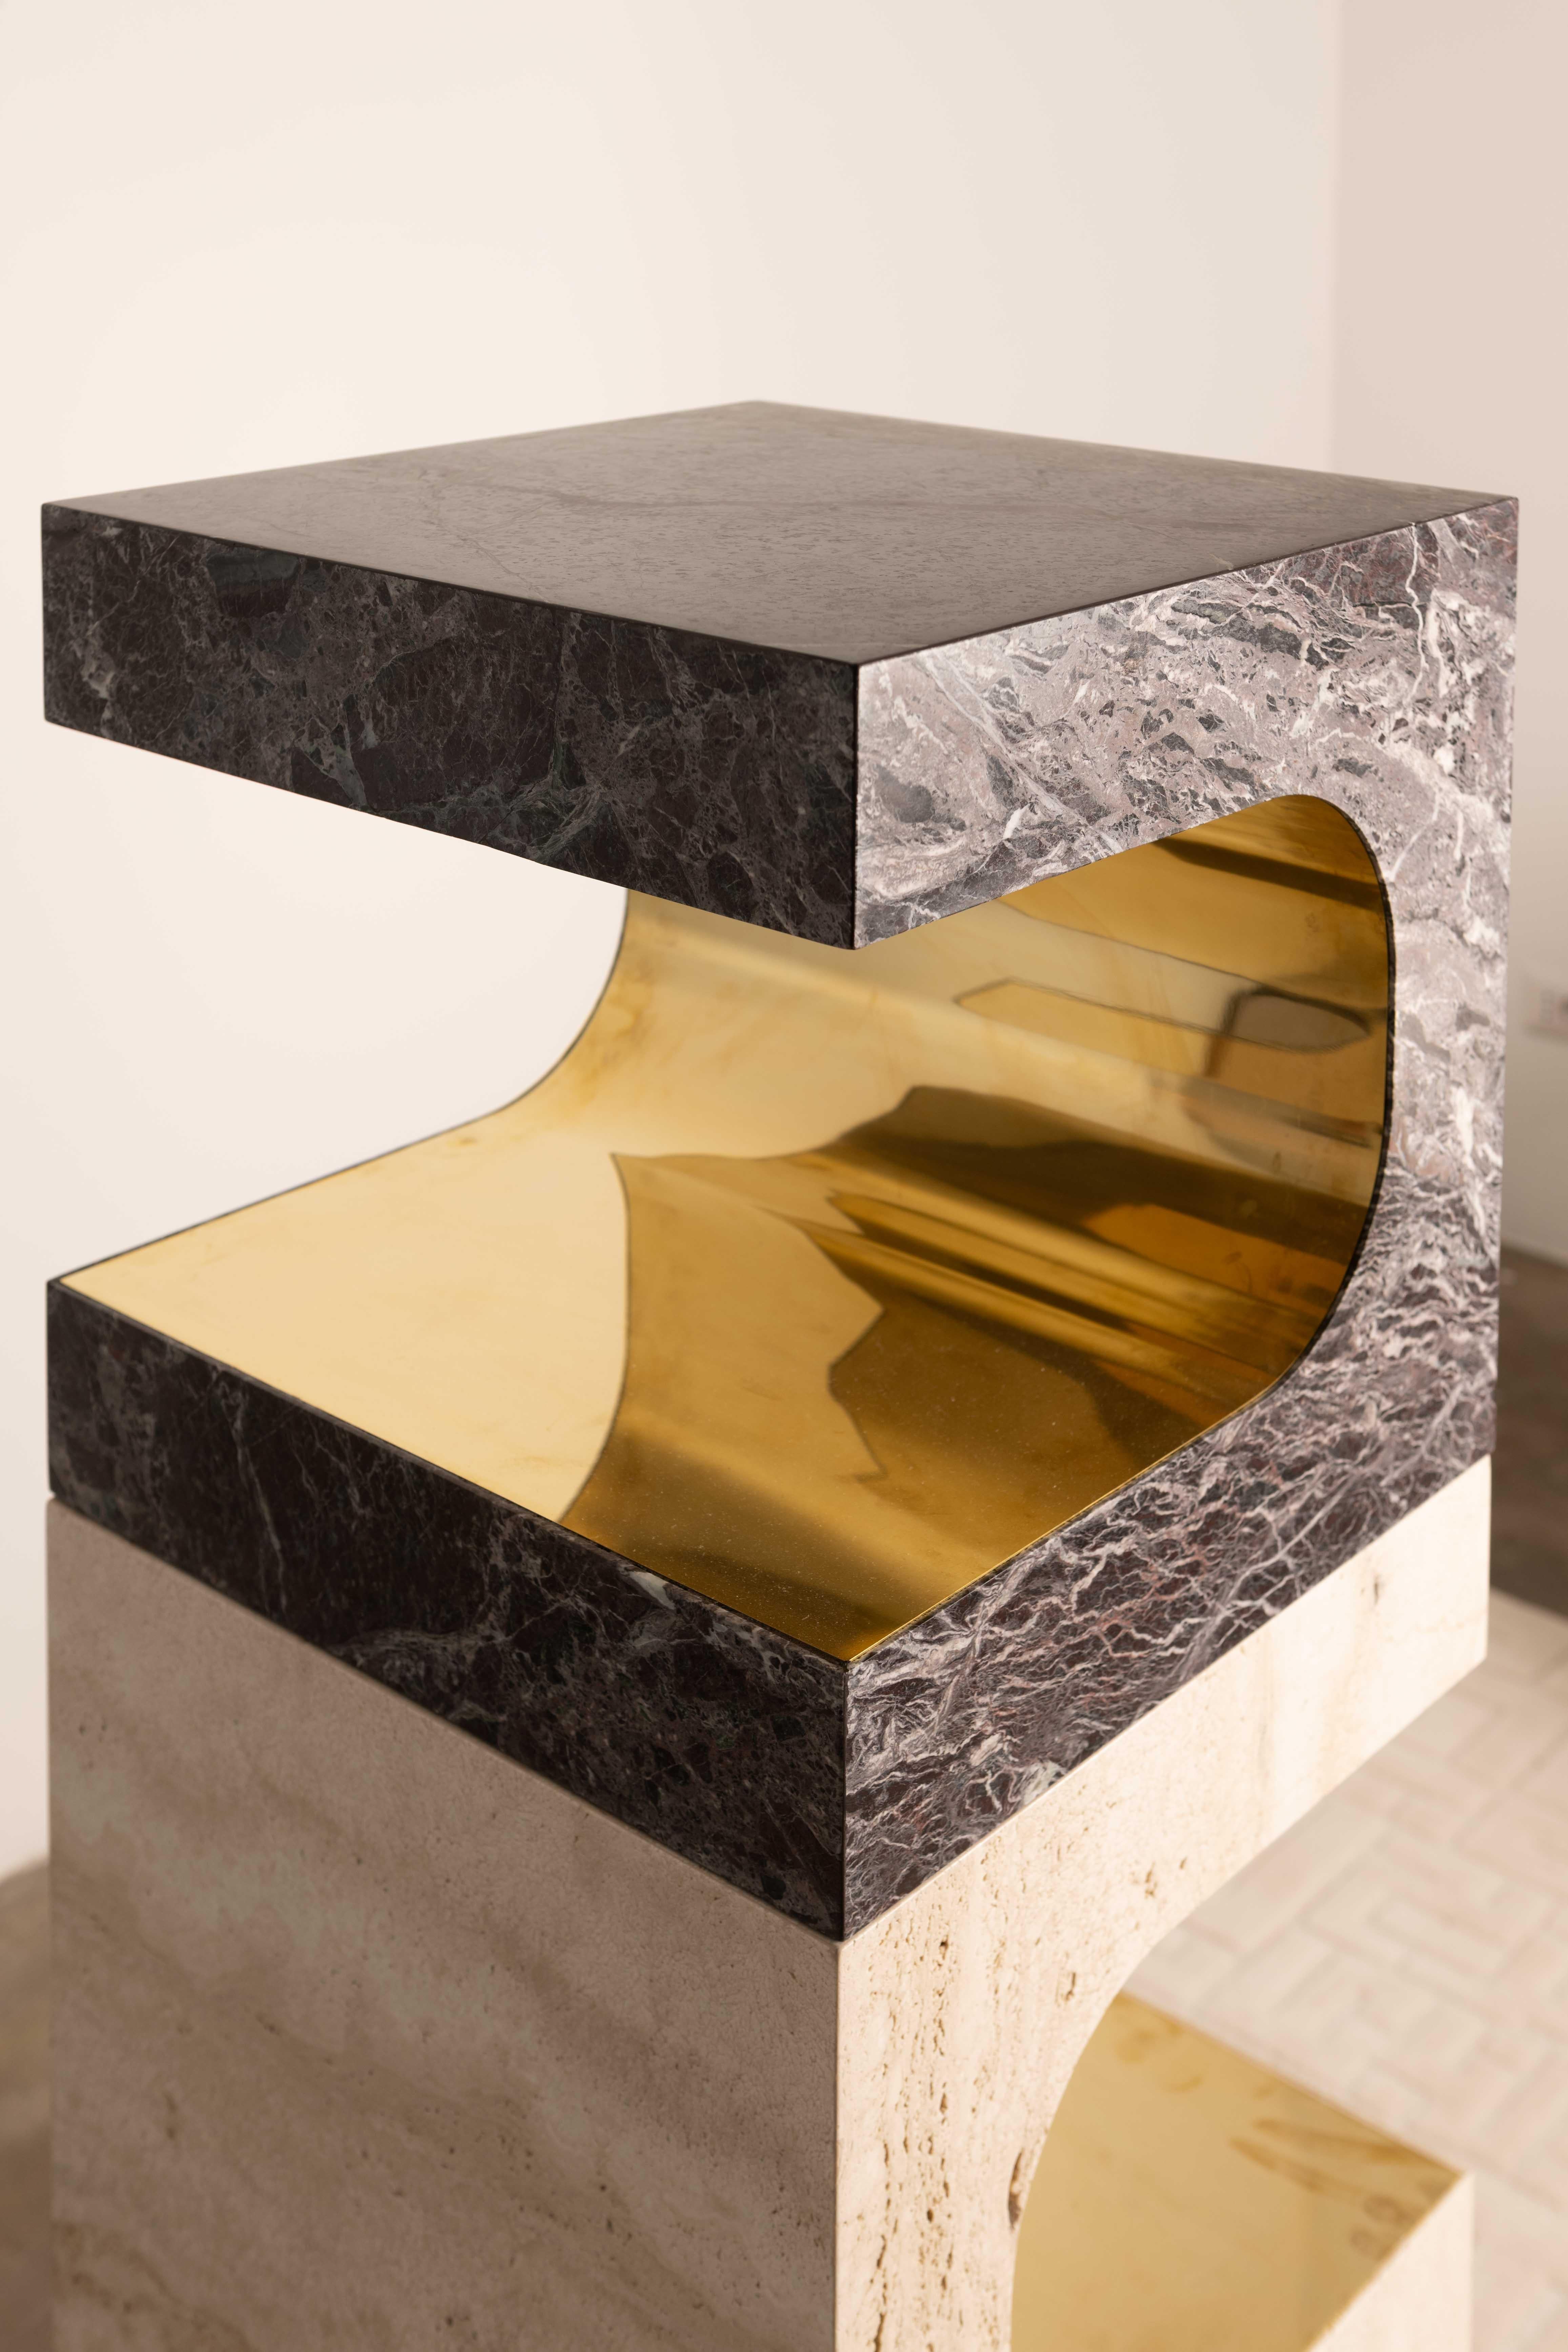 NU is a Coffee table handmade in Italy of Rosso Verona Marble.
Strong, sturdy and quite charming. Nu can be anything you want.
Nu can create benches, tables, planters, shelves and may fill an entire room if you do want to be so wild.
You can be as